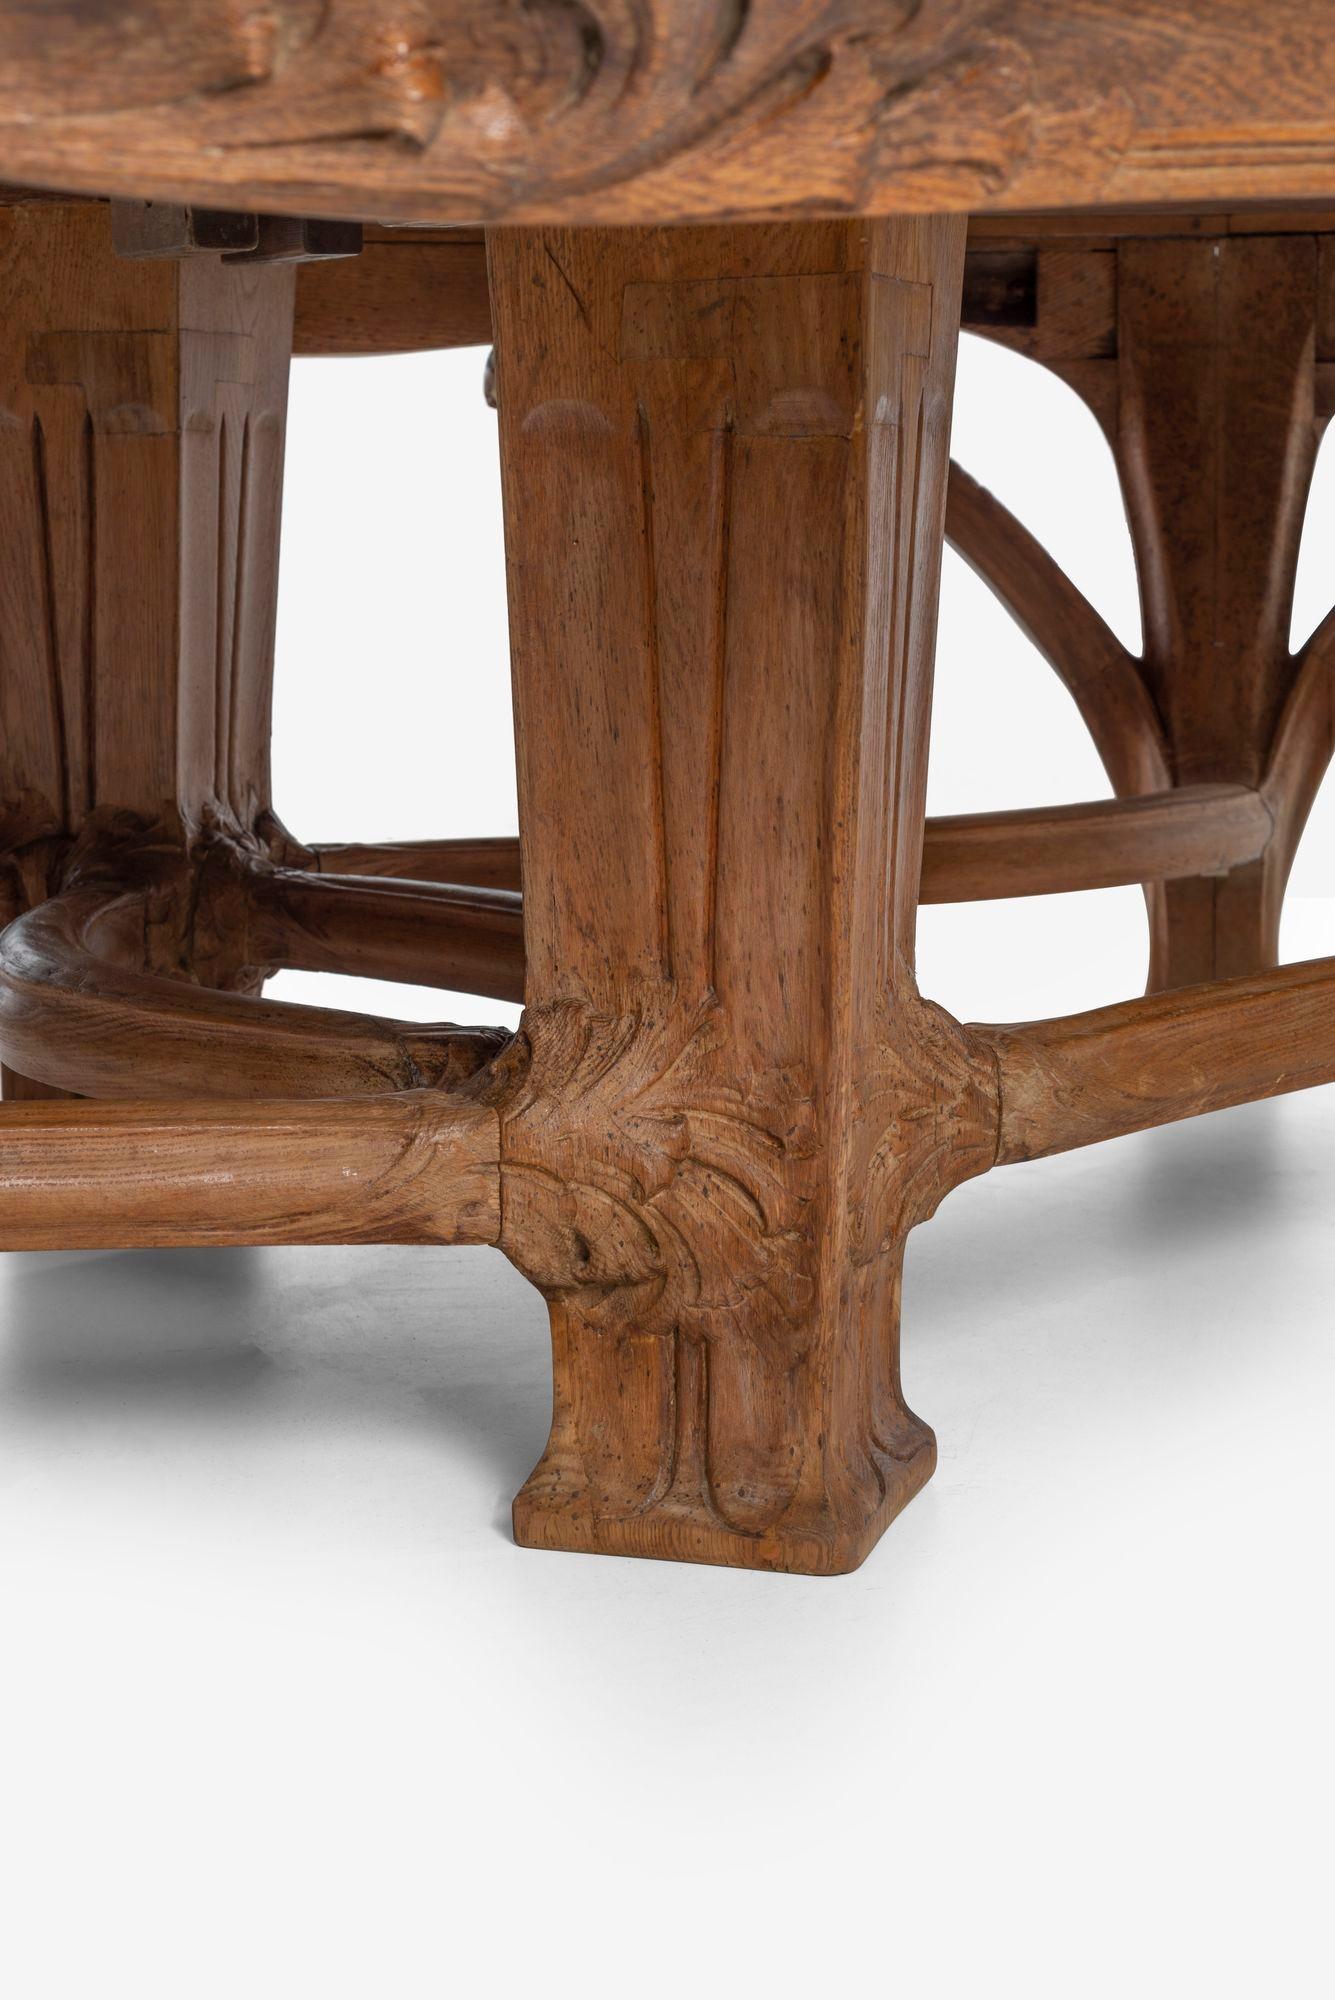 Monumental Art Nouveau Dining Table Attributed to Victor Horta from the Firehous For Sale 4